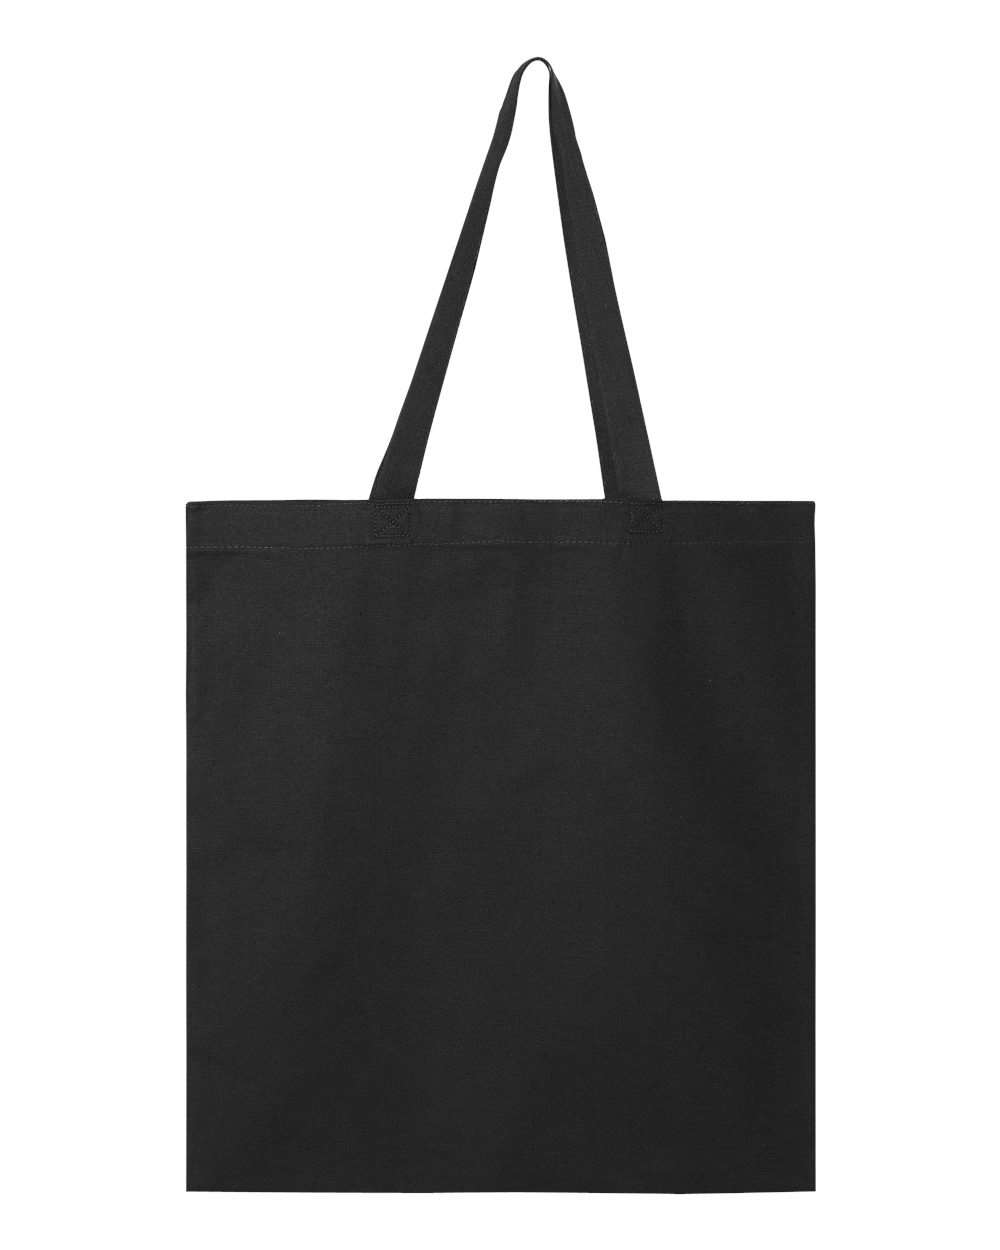 Pretreated Q-Tees Q800 Promotional Tote